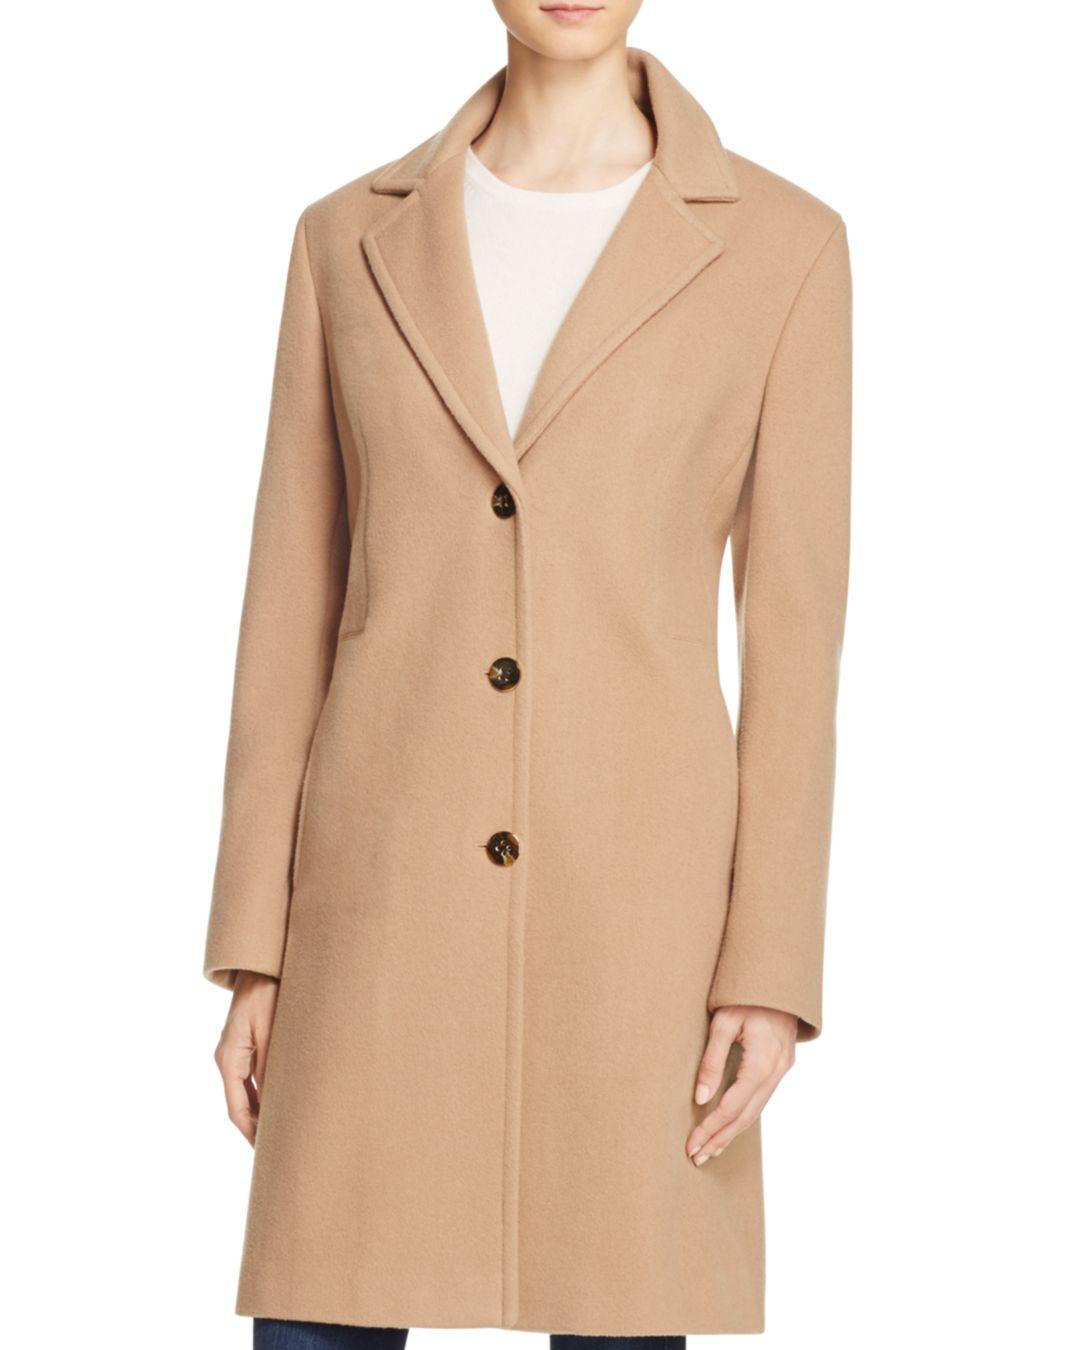 Calvin Klein Wool Single - Breasted Button Front Coat in Camel (Natural) -  Lyst